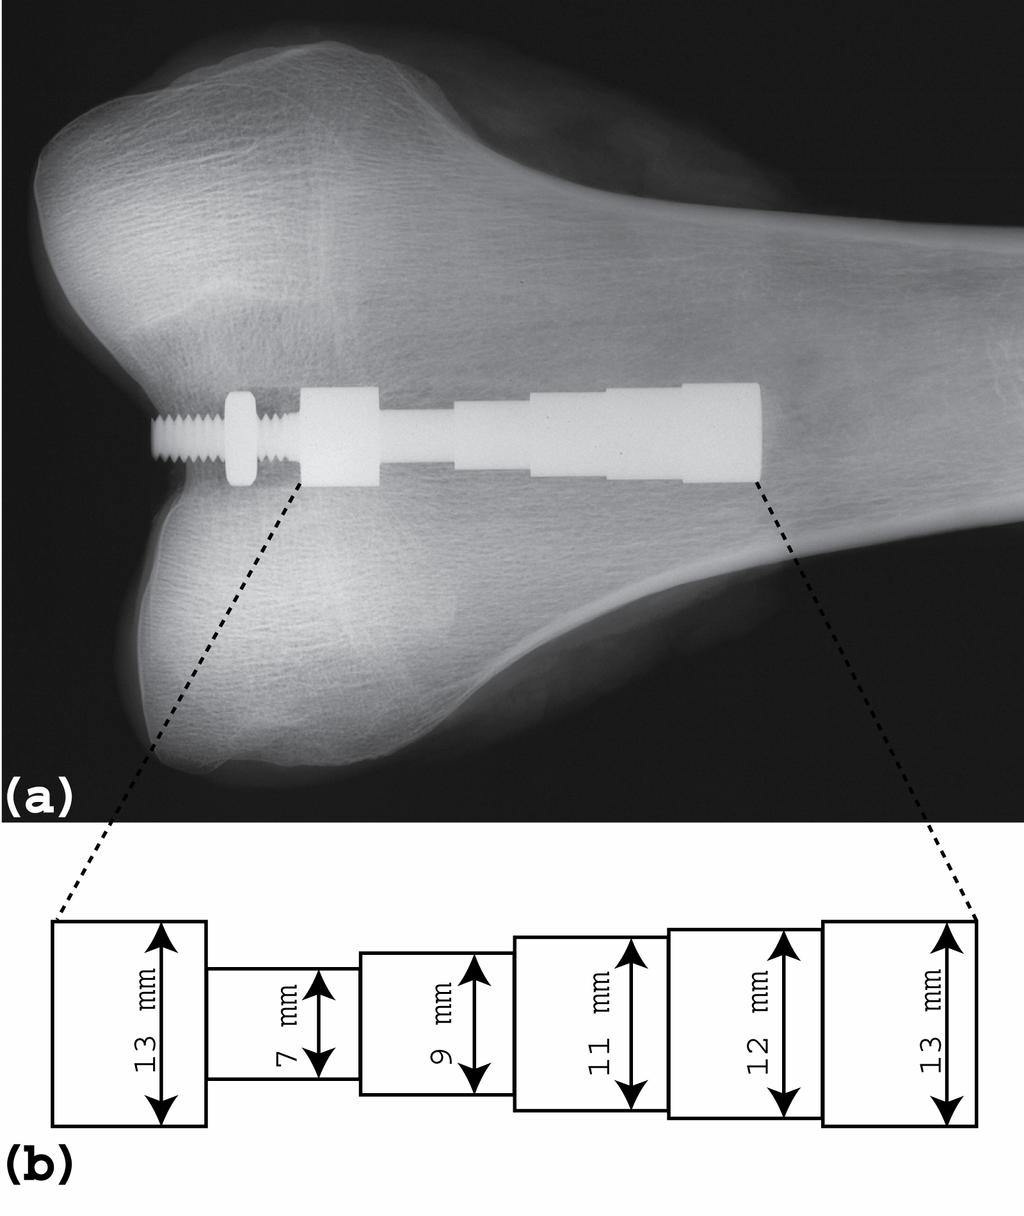 Figure 4.2 (a) A contact x-ray (Faxitron) of the distal femur with the stepped titanium implant inserted.